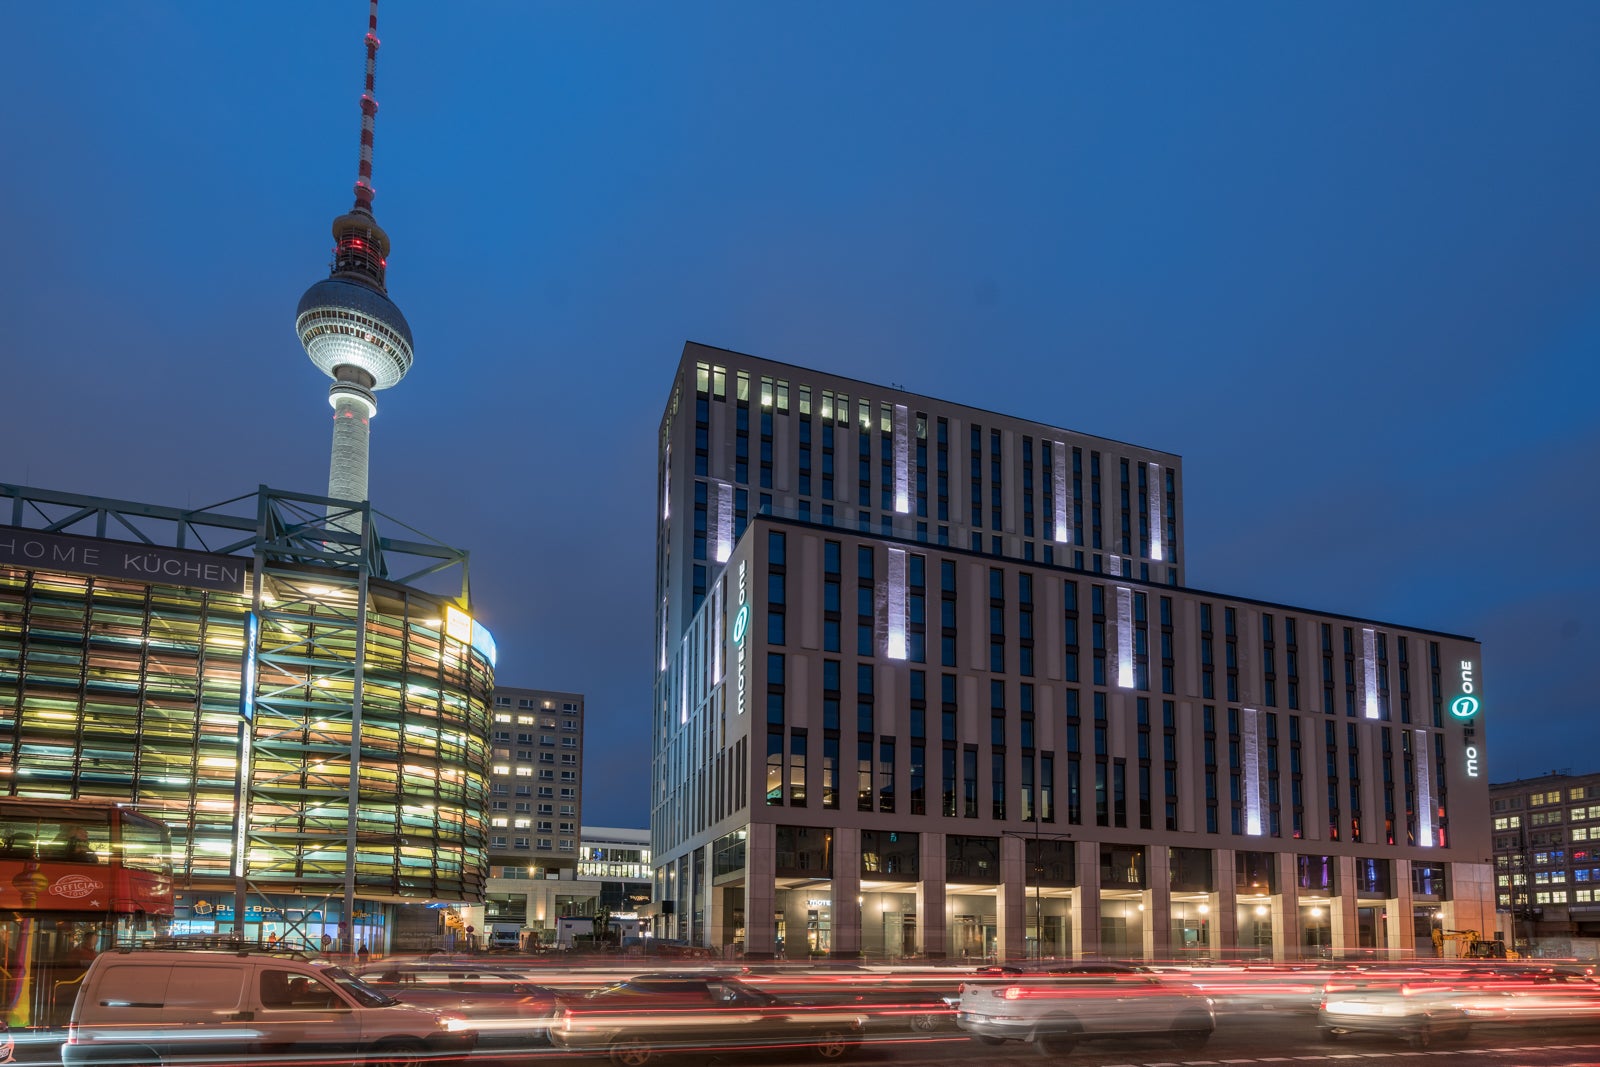 Short on change? The Motel One Berlin-Alexander is an ideal choice for the Berlin-bound